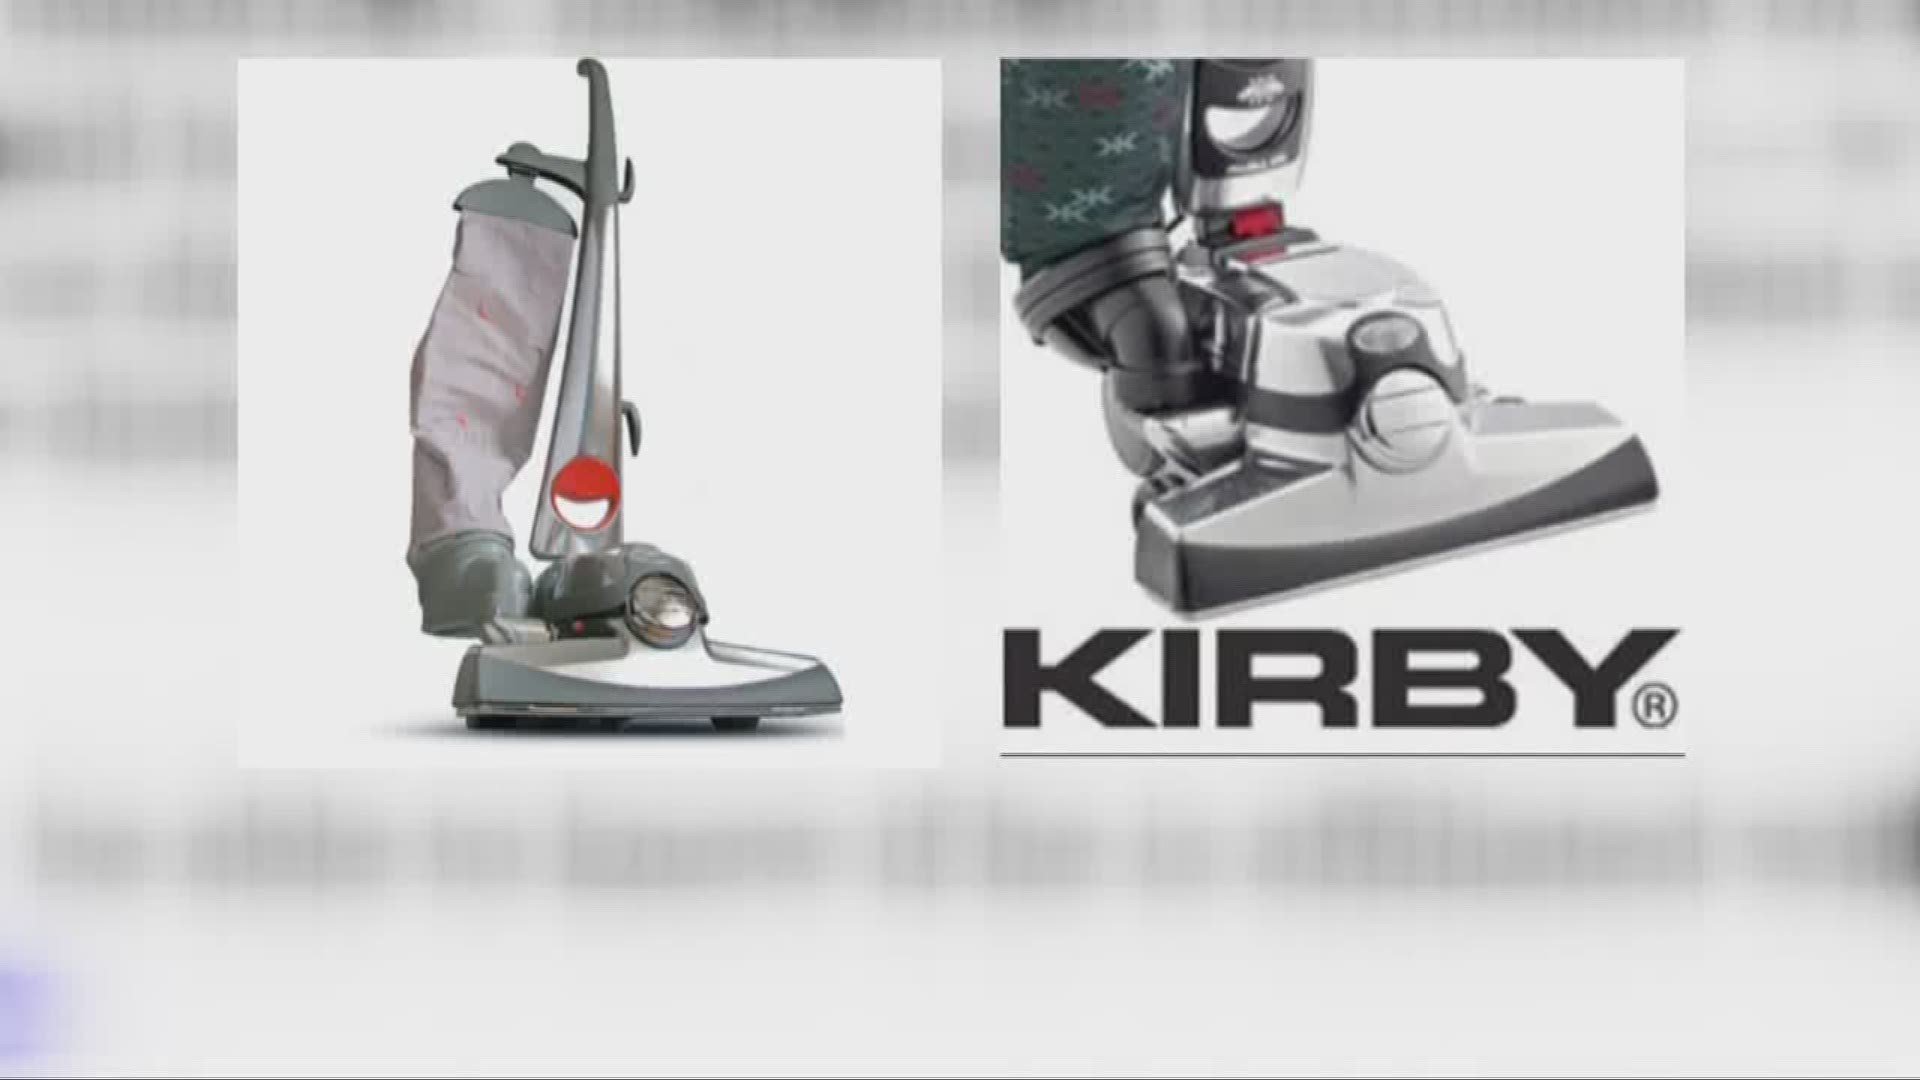 Kirby Vacuum Reviews - Get The Right Decision.